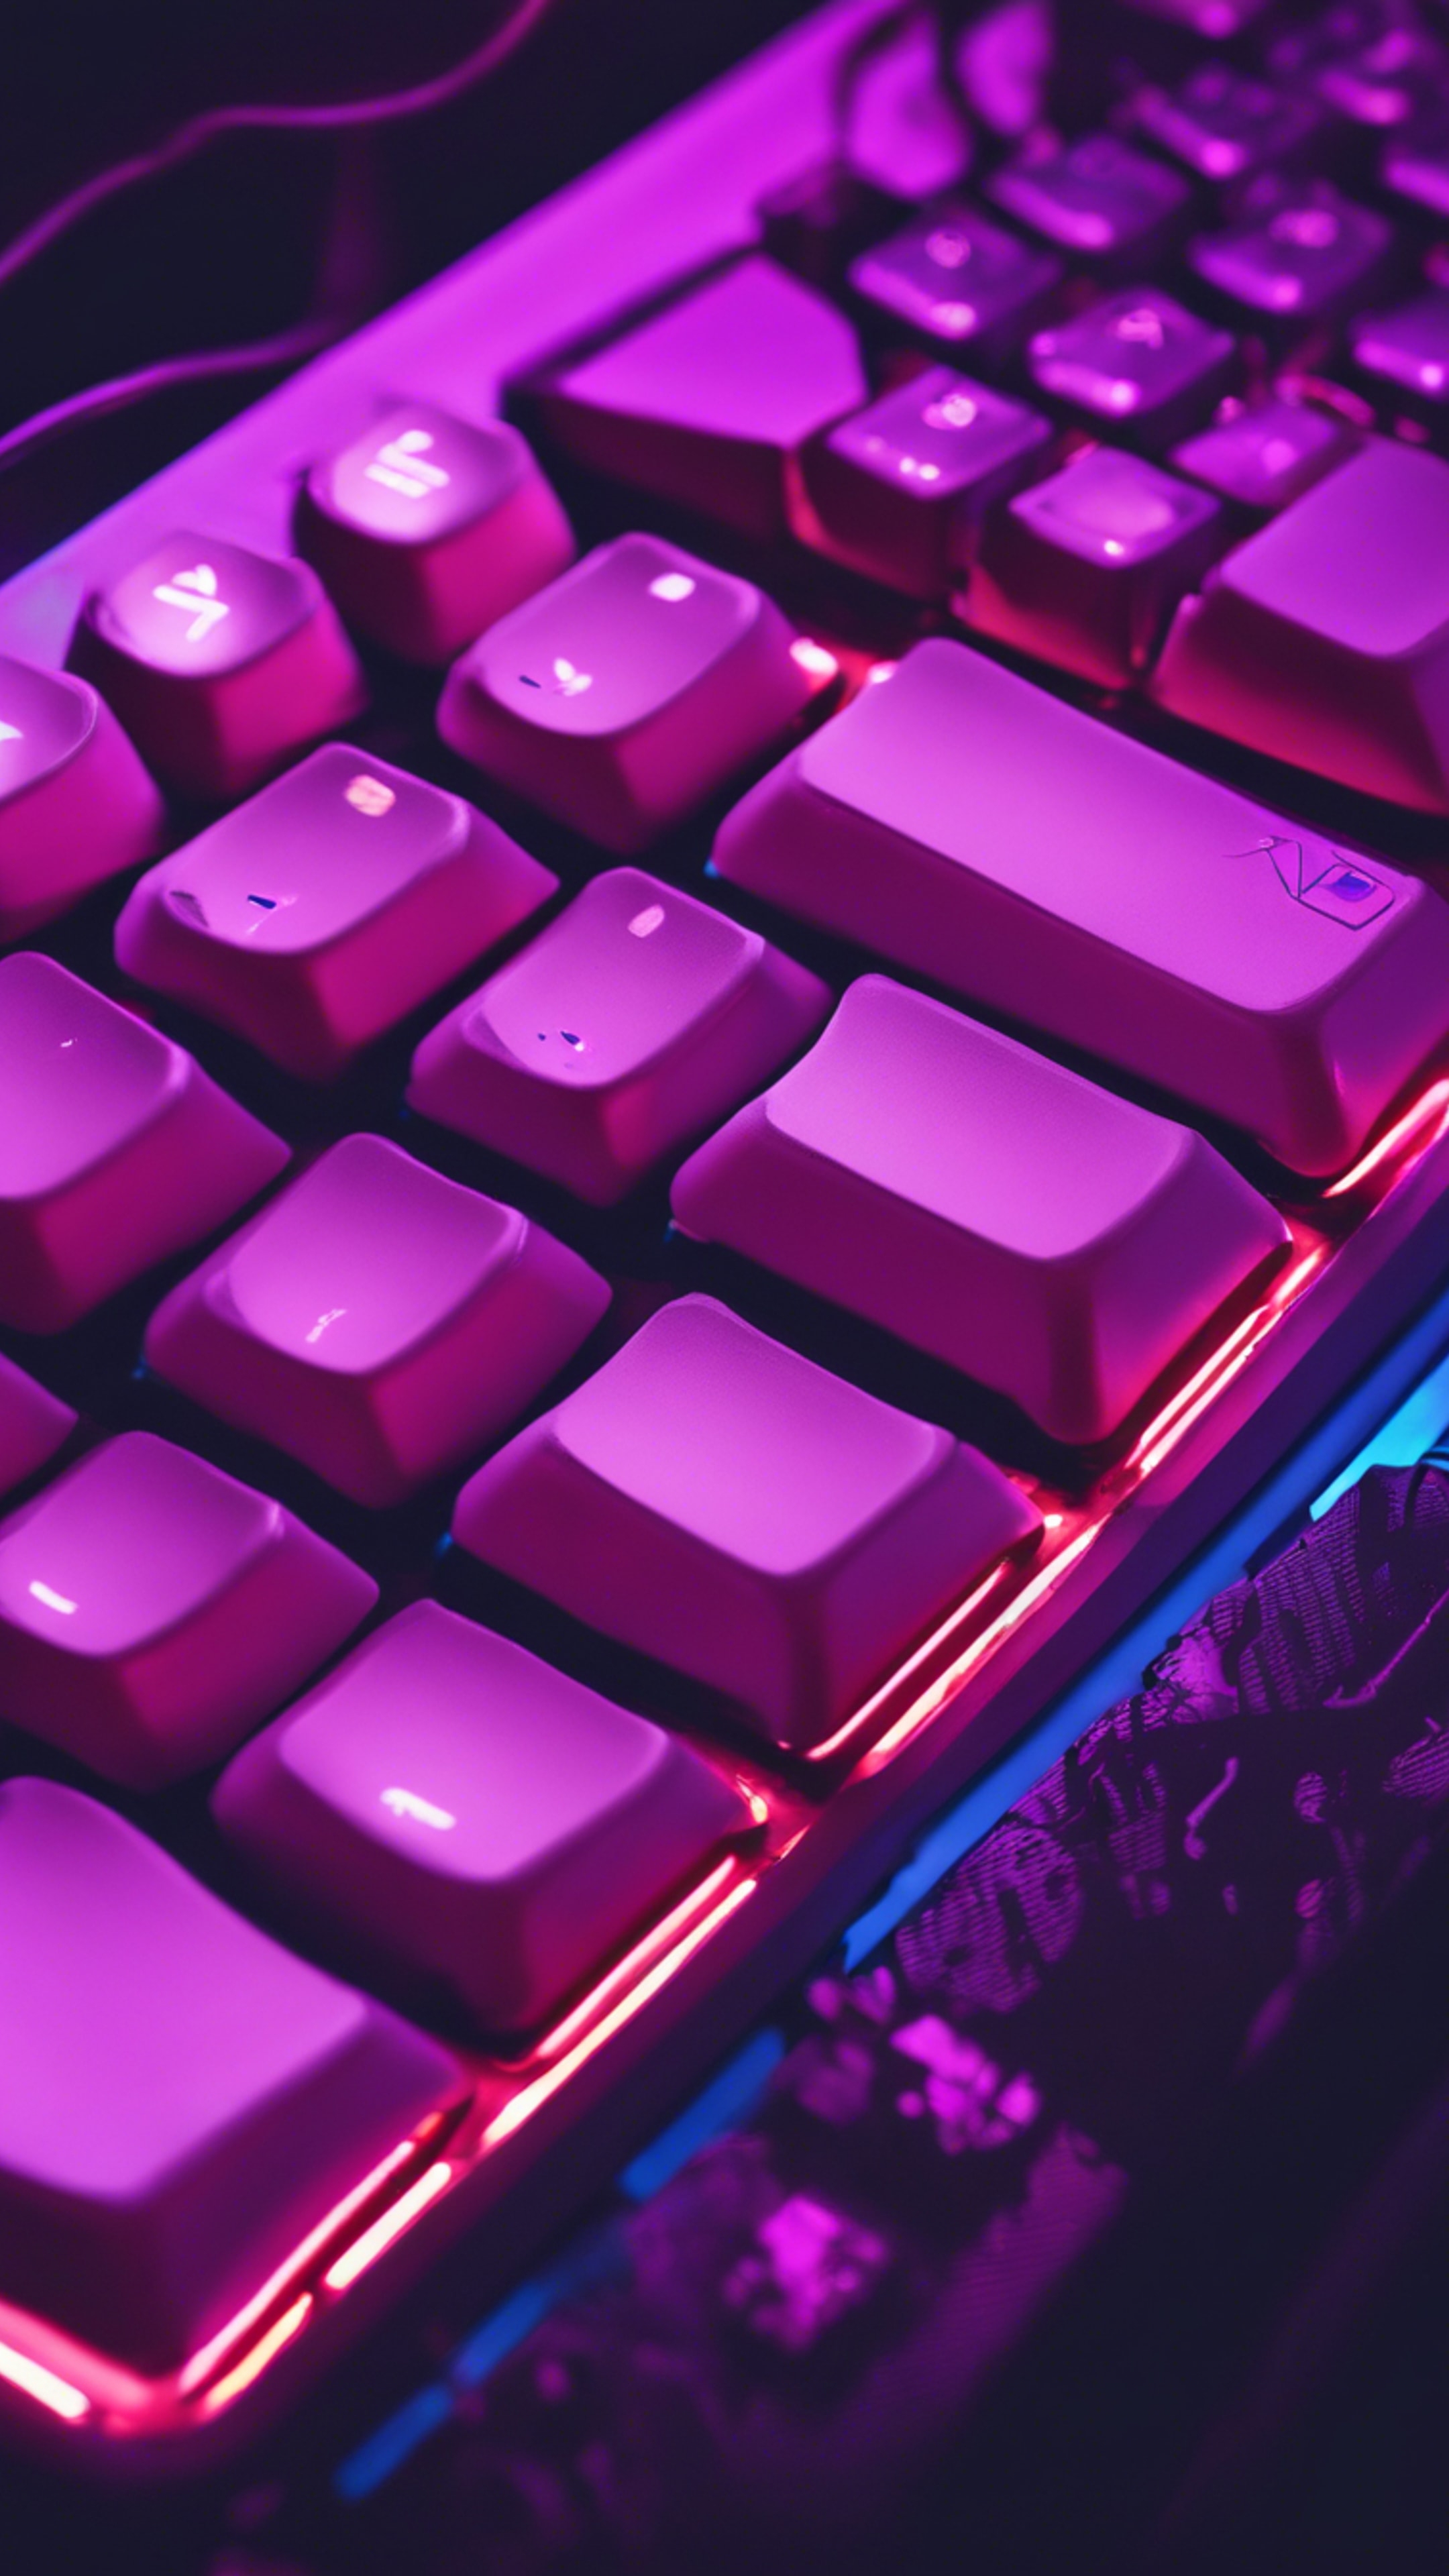 A detailed close-up image of a neon purple backlit gaming keyboard in a dark room. Behang[fb3f2373aec546b8b630]